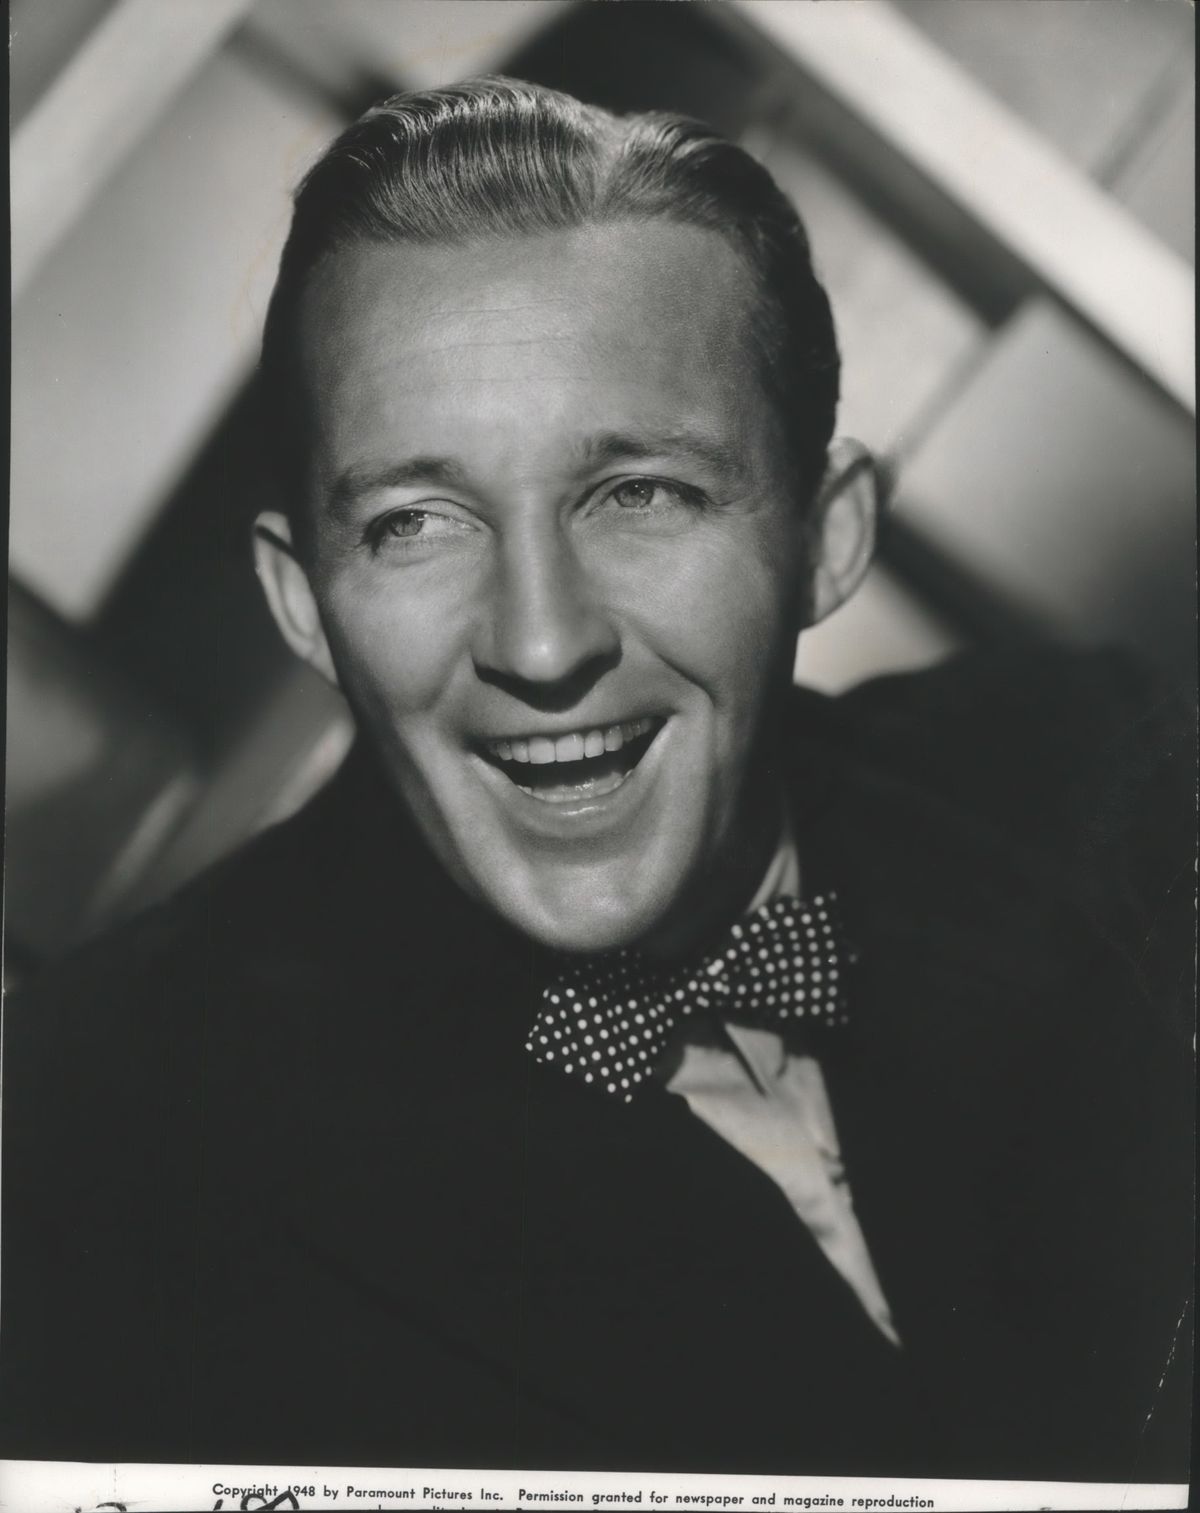 Bing Crosby had a hand in making “White Christmas” the beloved Christmas song it is today.  (Paramount Pictures)